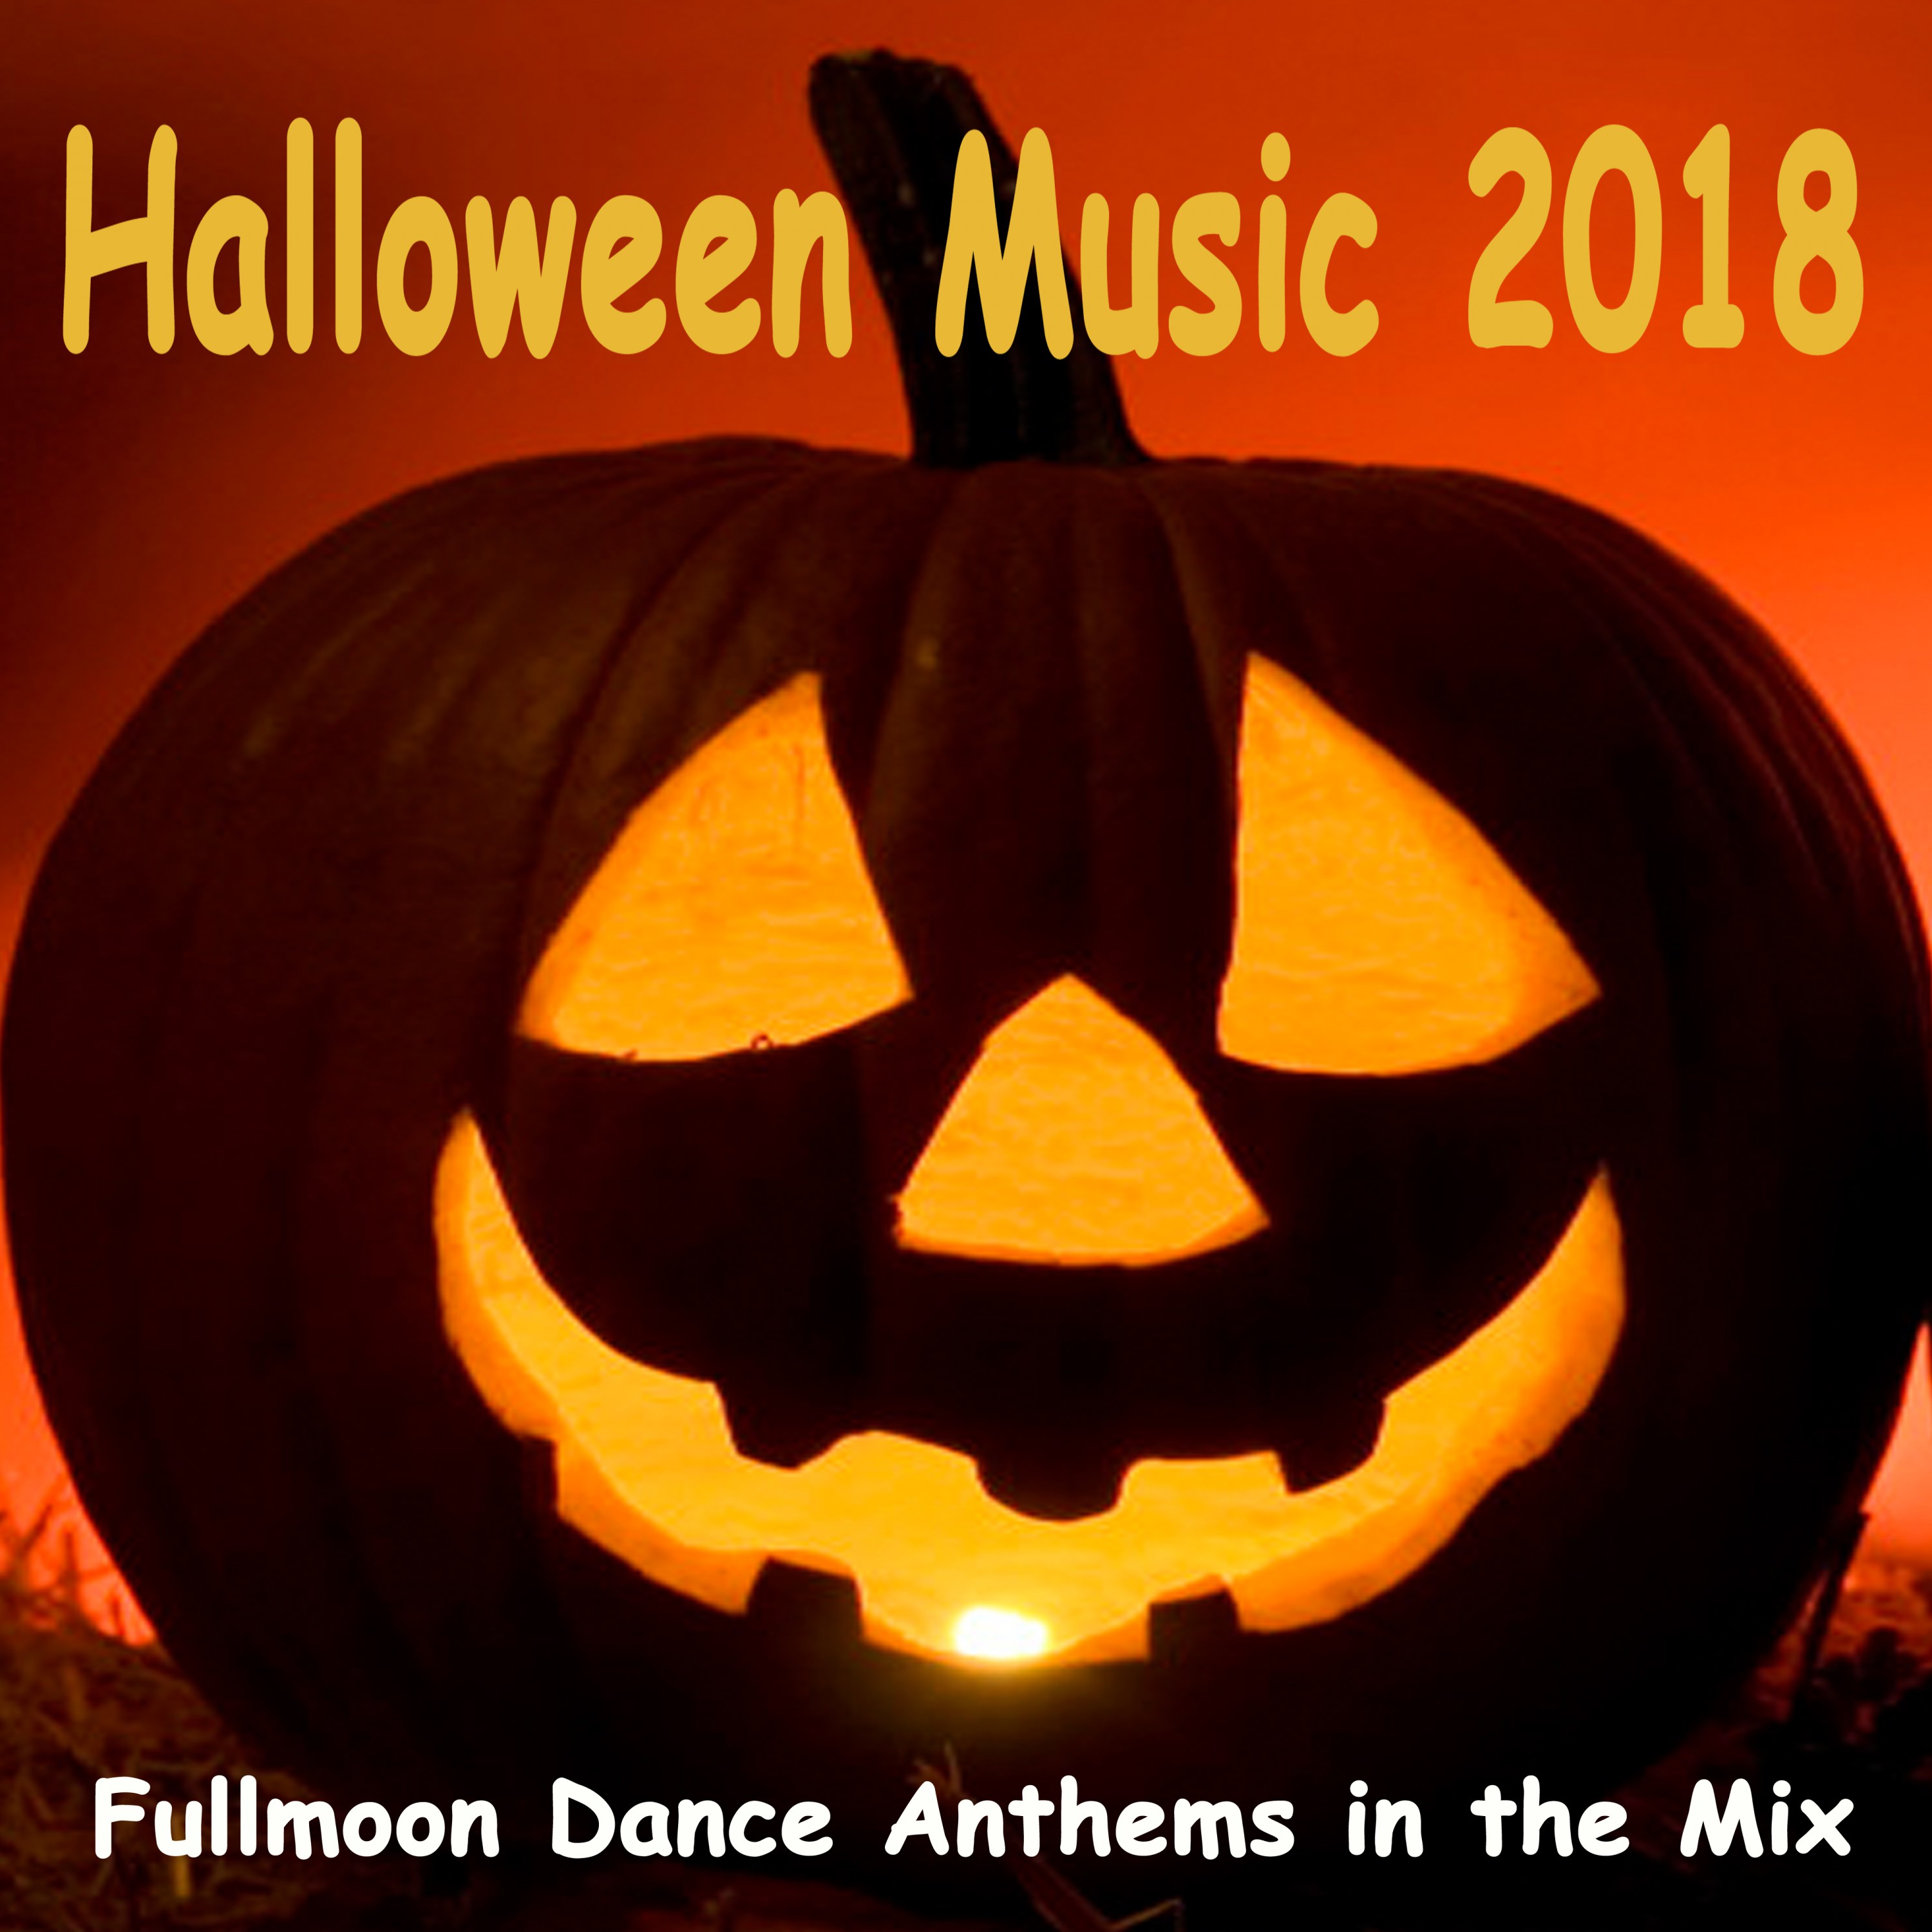 Halloween Music 2018 (Fullmoon Dance Anthems in the Mix) [Continuous DJ Mix]